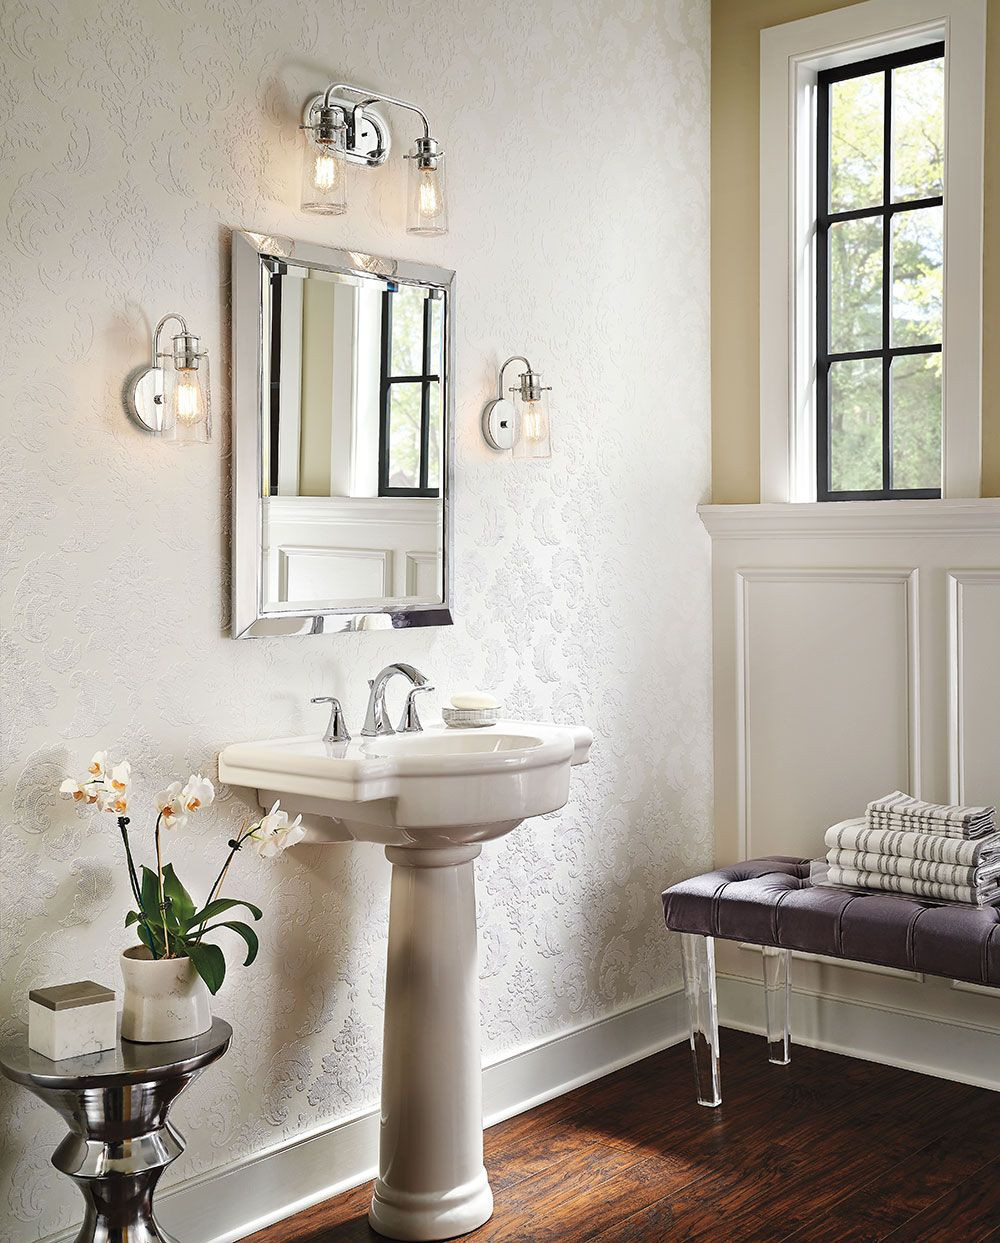 Wall Sconces For Bathroom Vanity
 There s so much to love about the reclaimed style of the